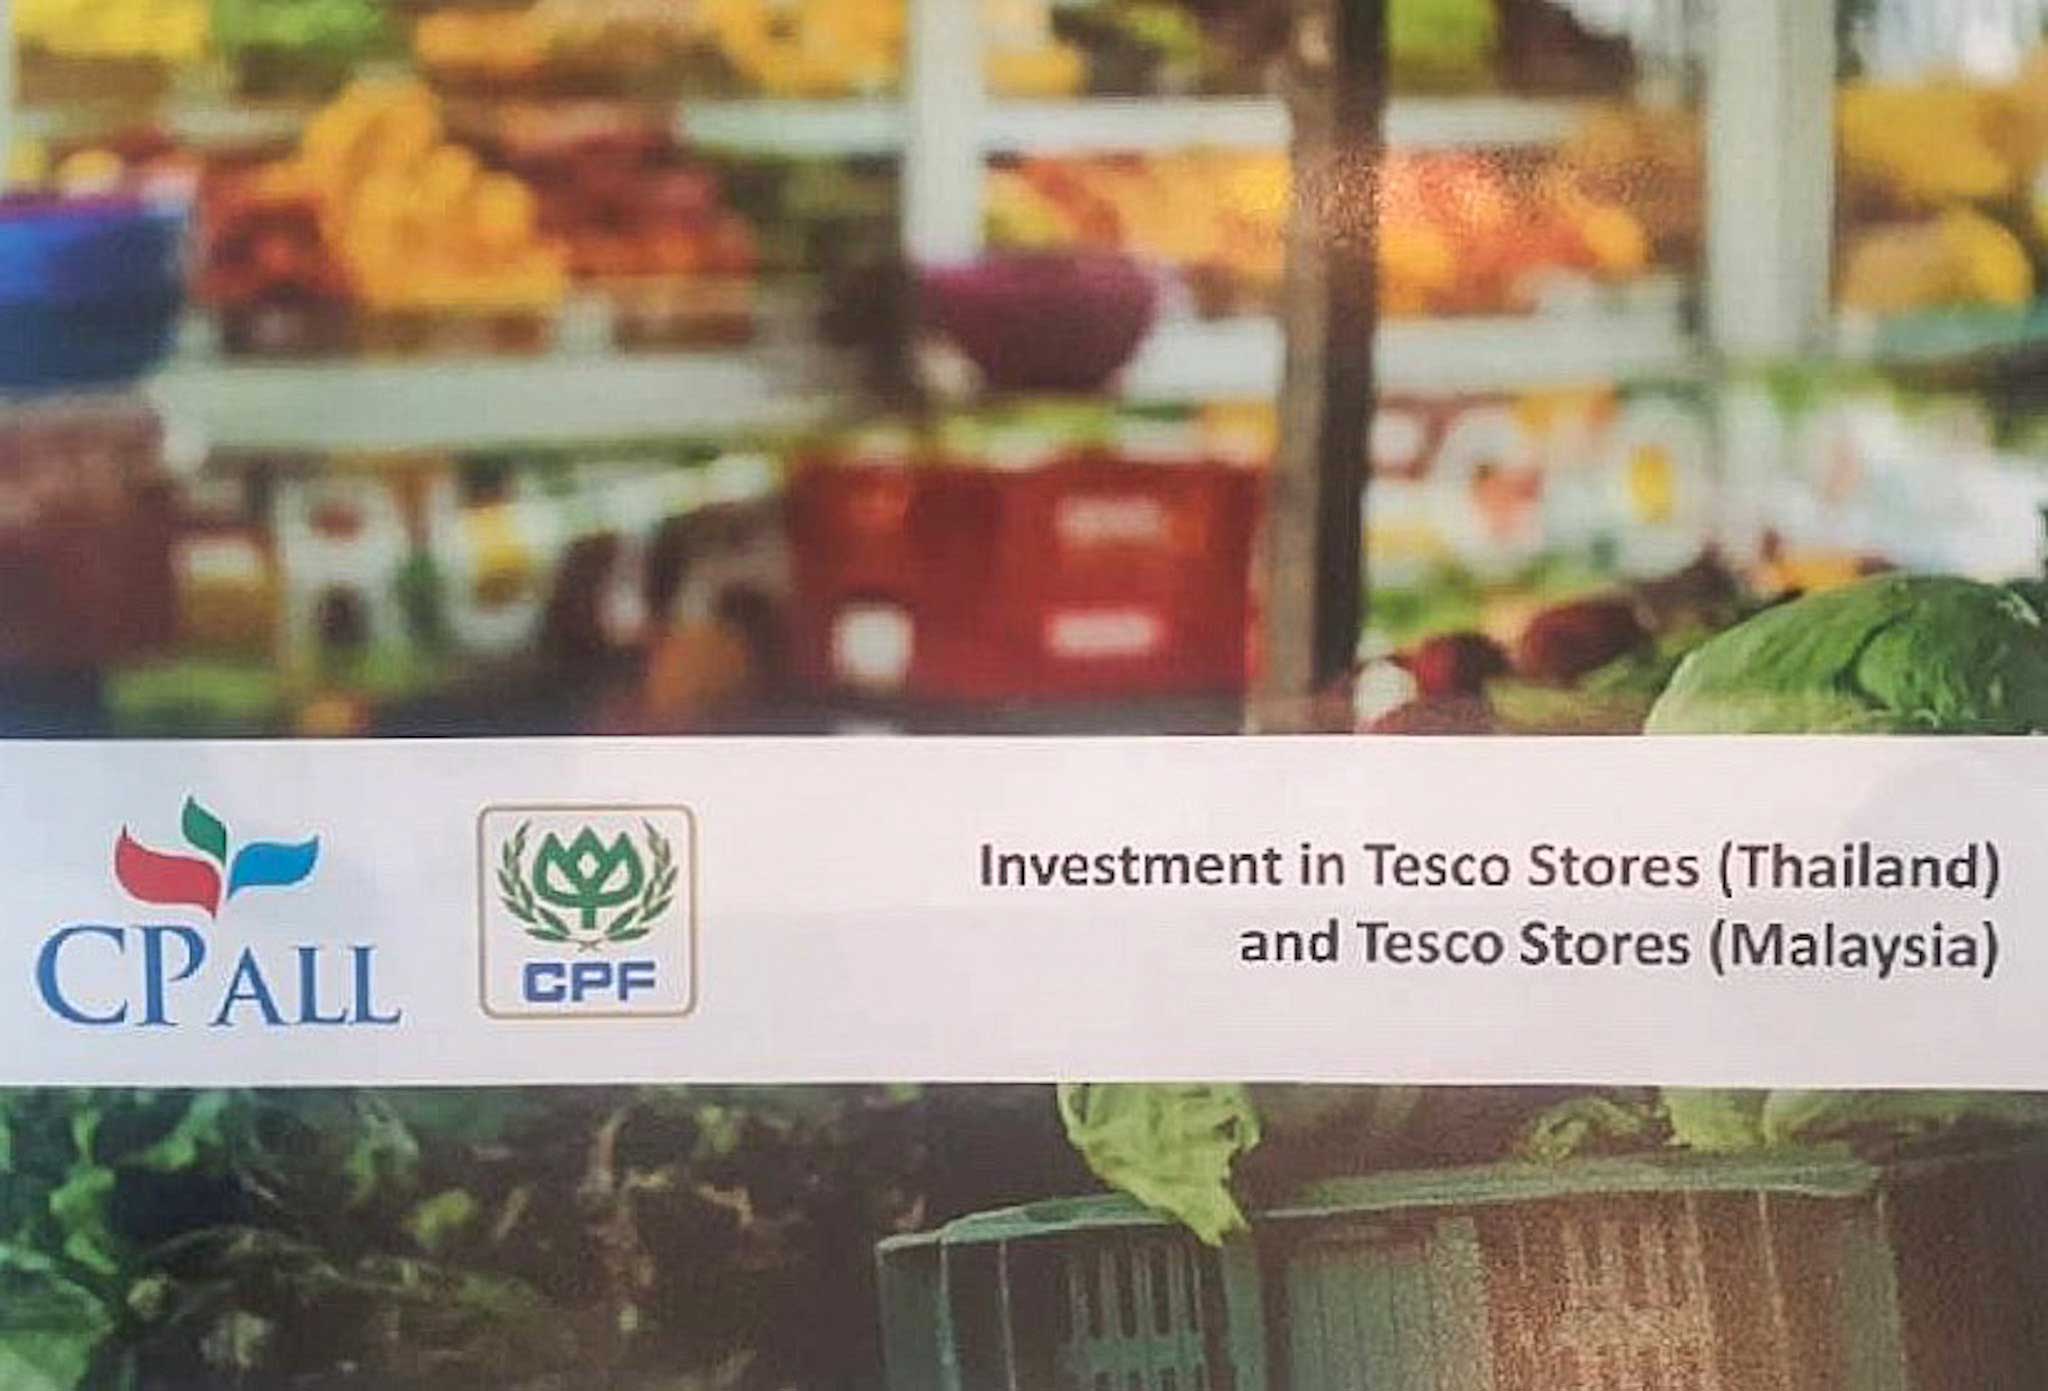 CPF to Take 20% Stake in Tesco Aiming to expand distribution arms in Thailand and Malaysia With Tesco’s strong performance and business model as key to success